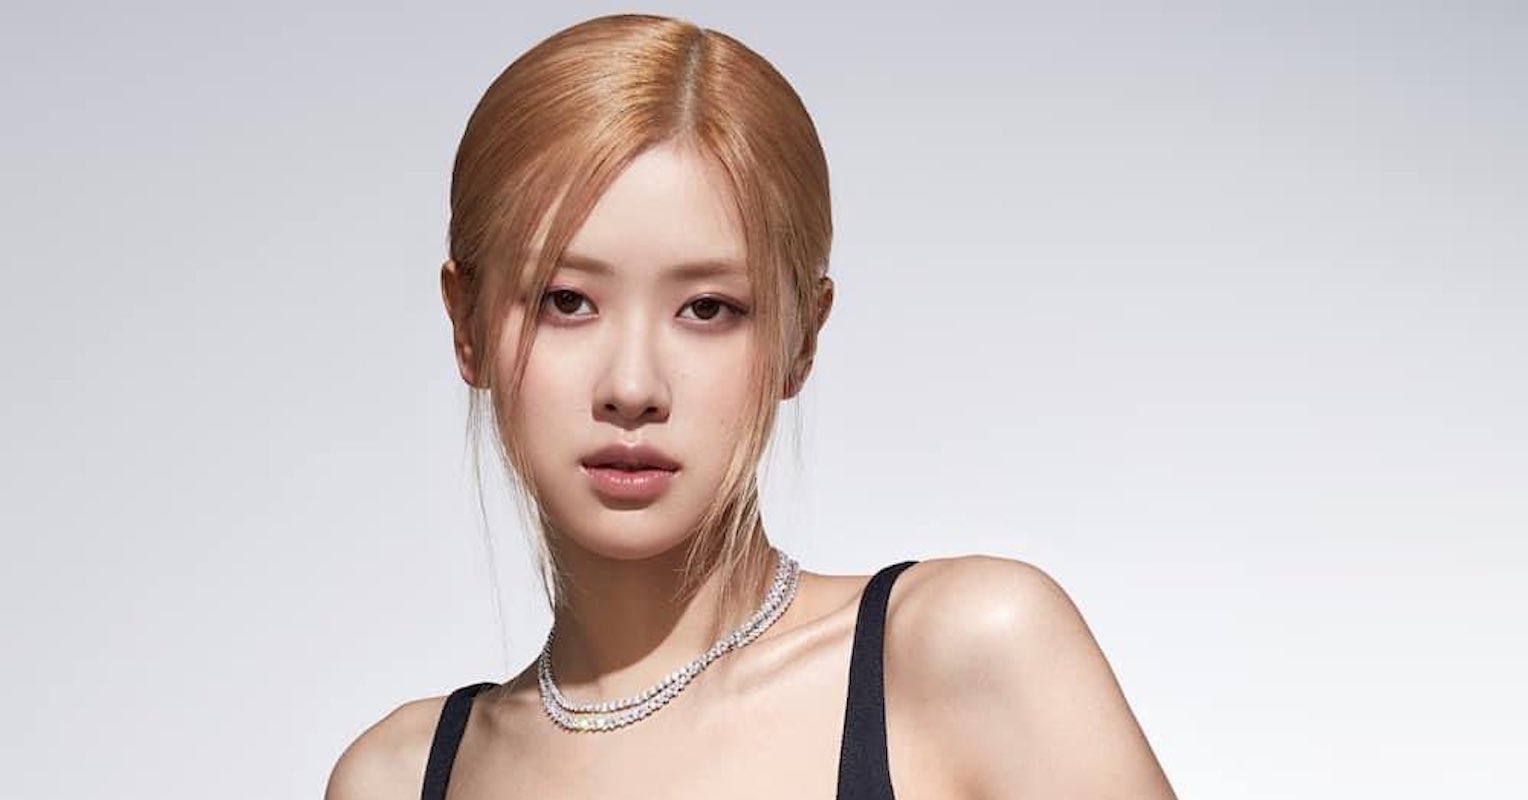 Blackpink's Rosé inspires a new Tiffany & Co. Lock collection